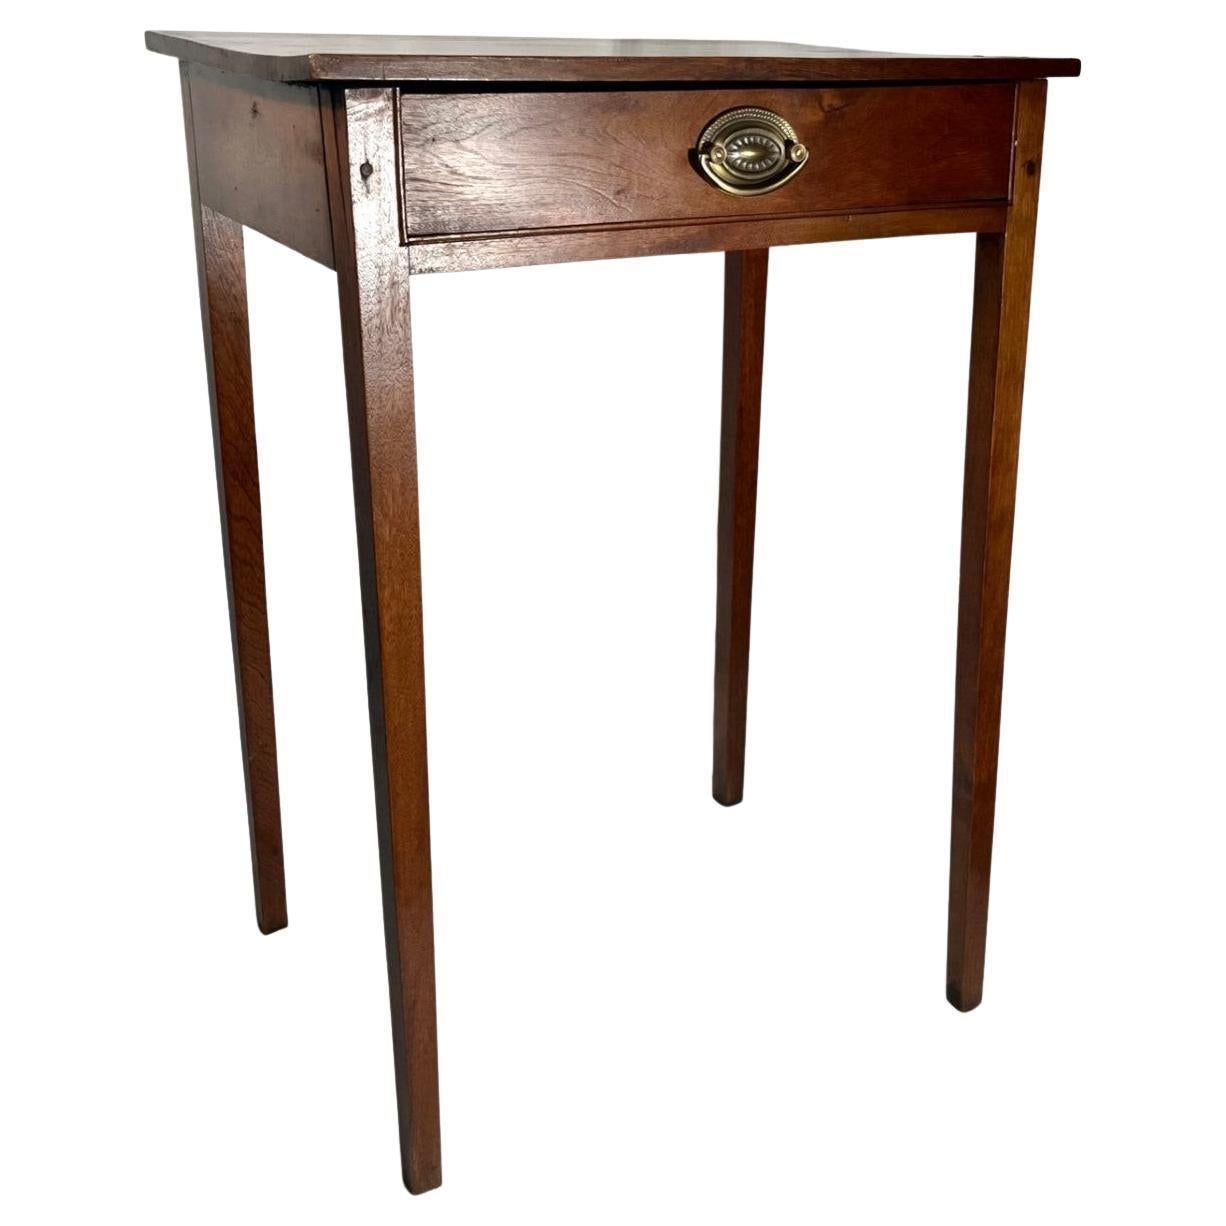 18th Century American Hepplewhite Federal Style Mahogany Side Table For Sale 6